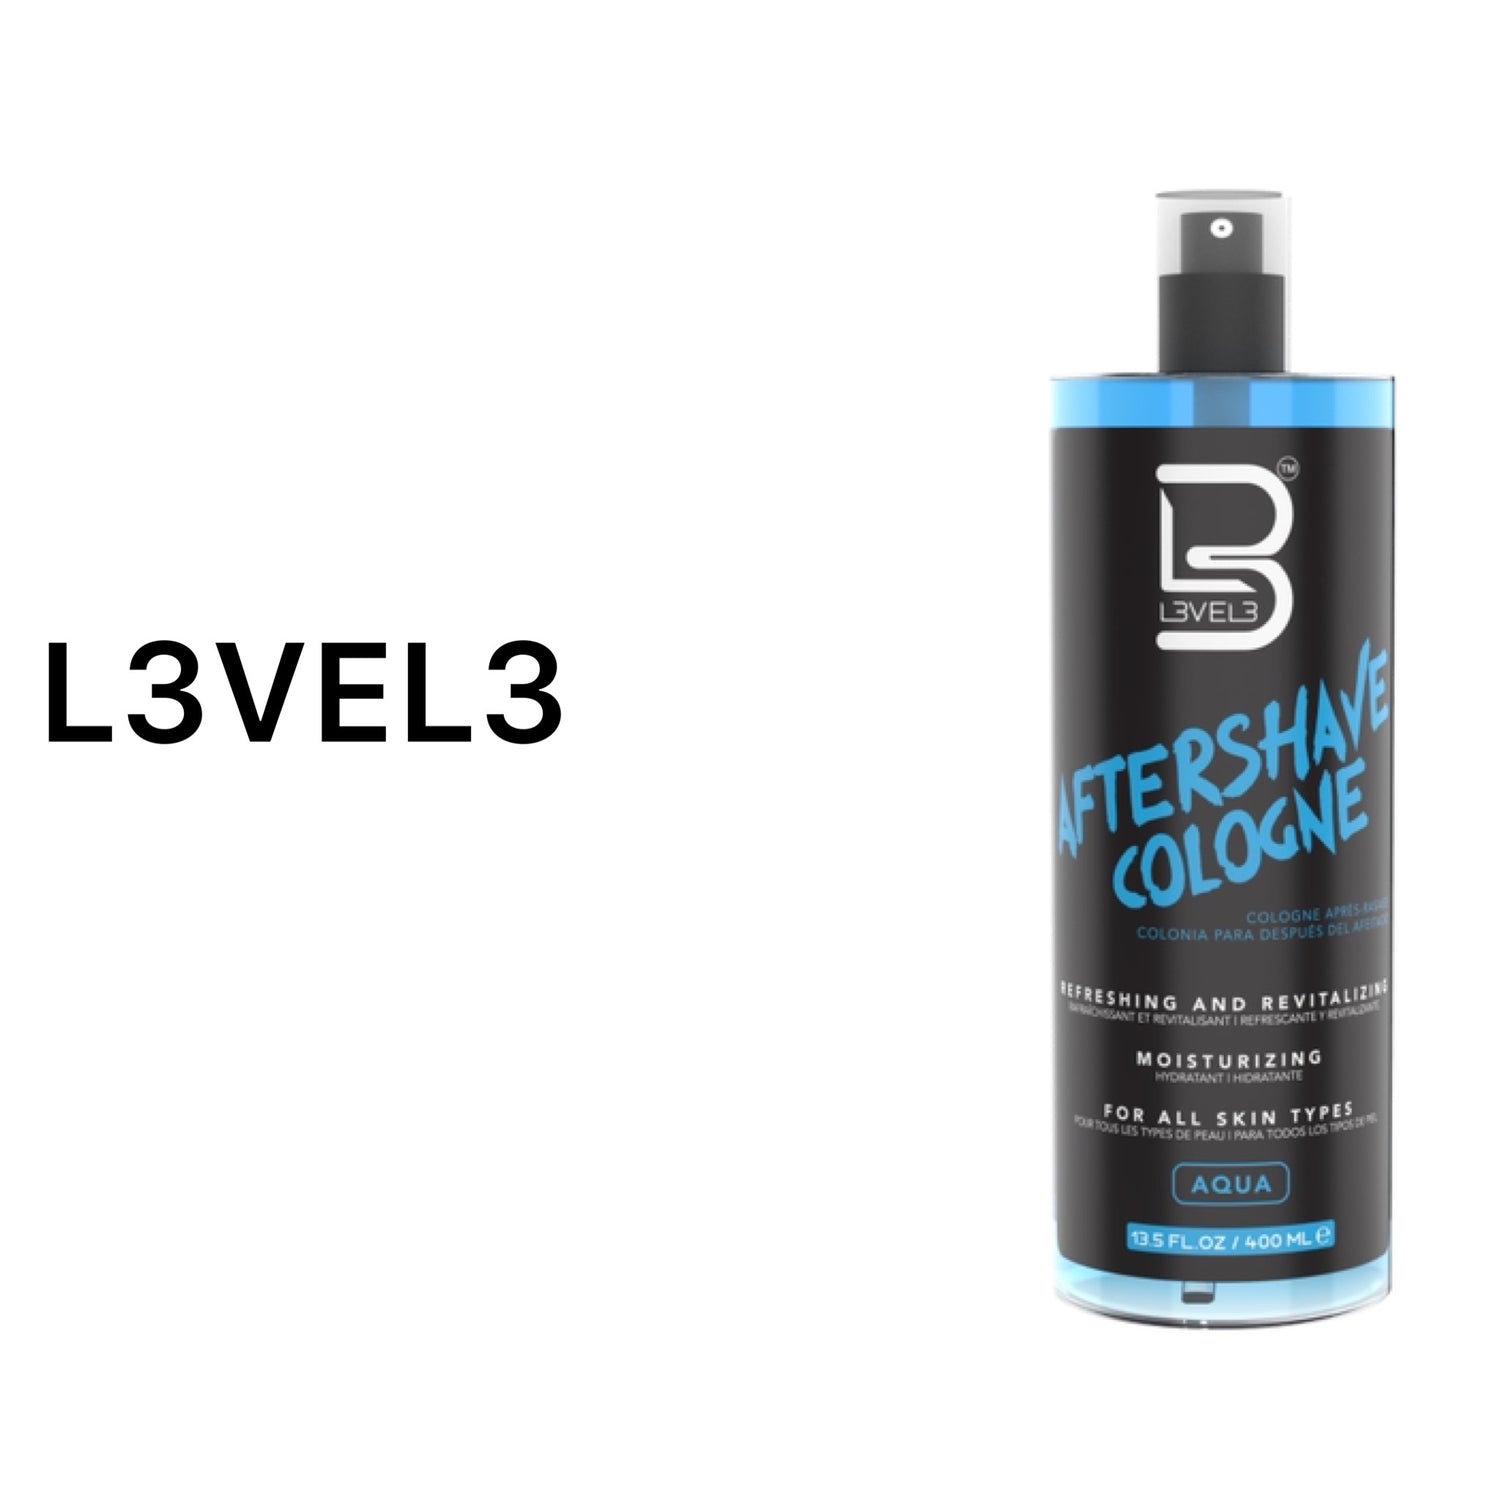 L3VEL3 Barber Products